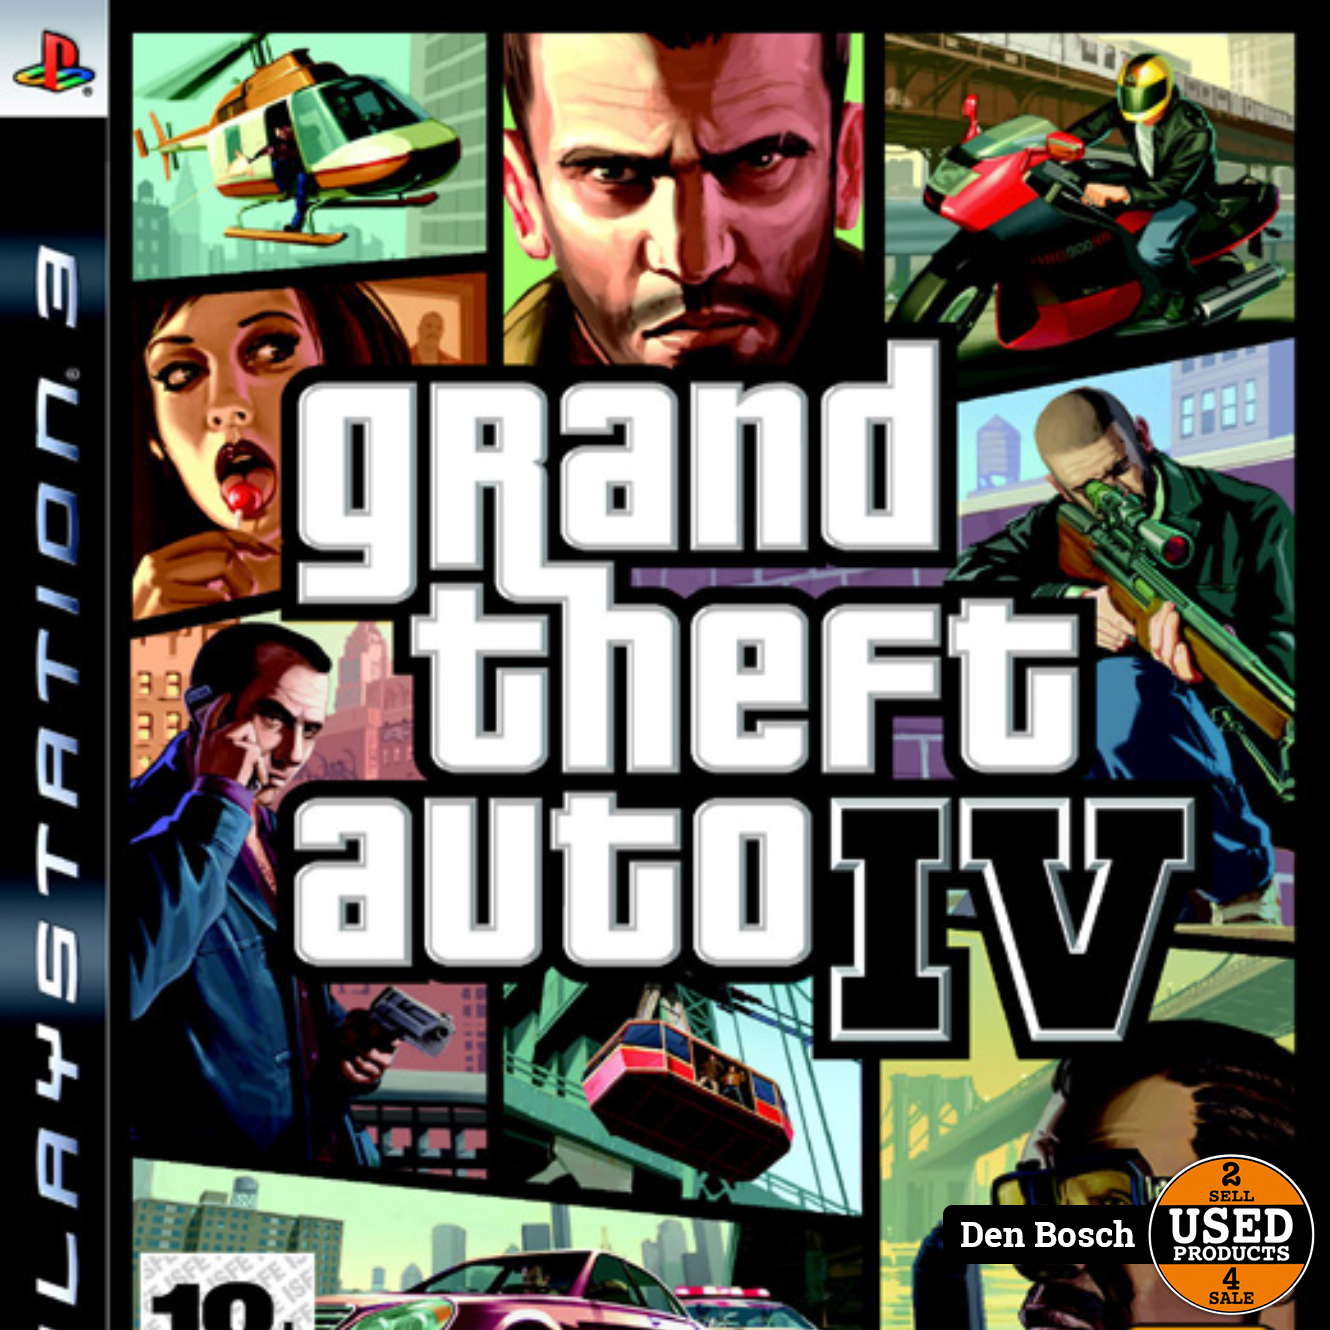 Theft Auto IV - PS3 Game - Used Products Den Bosch